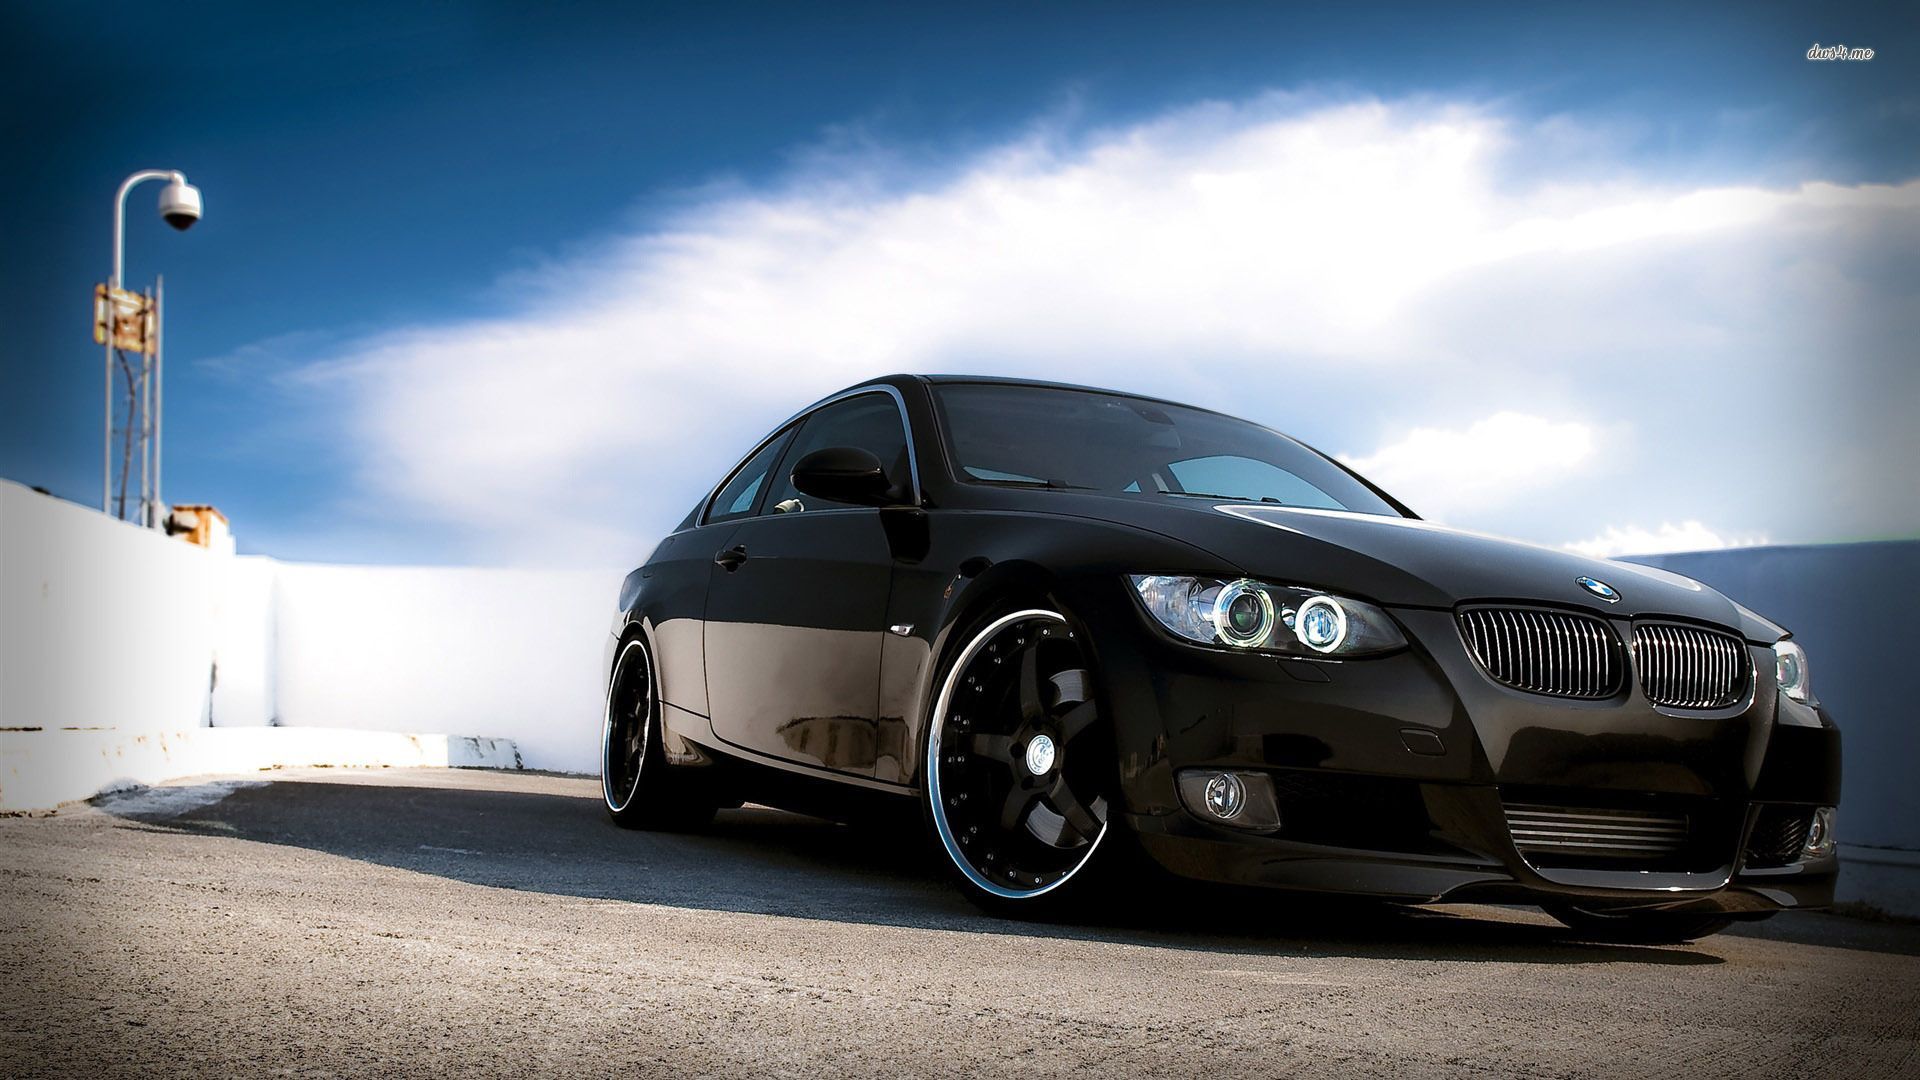 Forged BMW 335i Coupe HD wallpaper .com